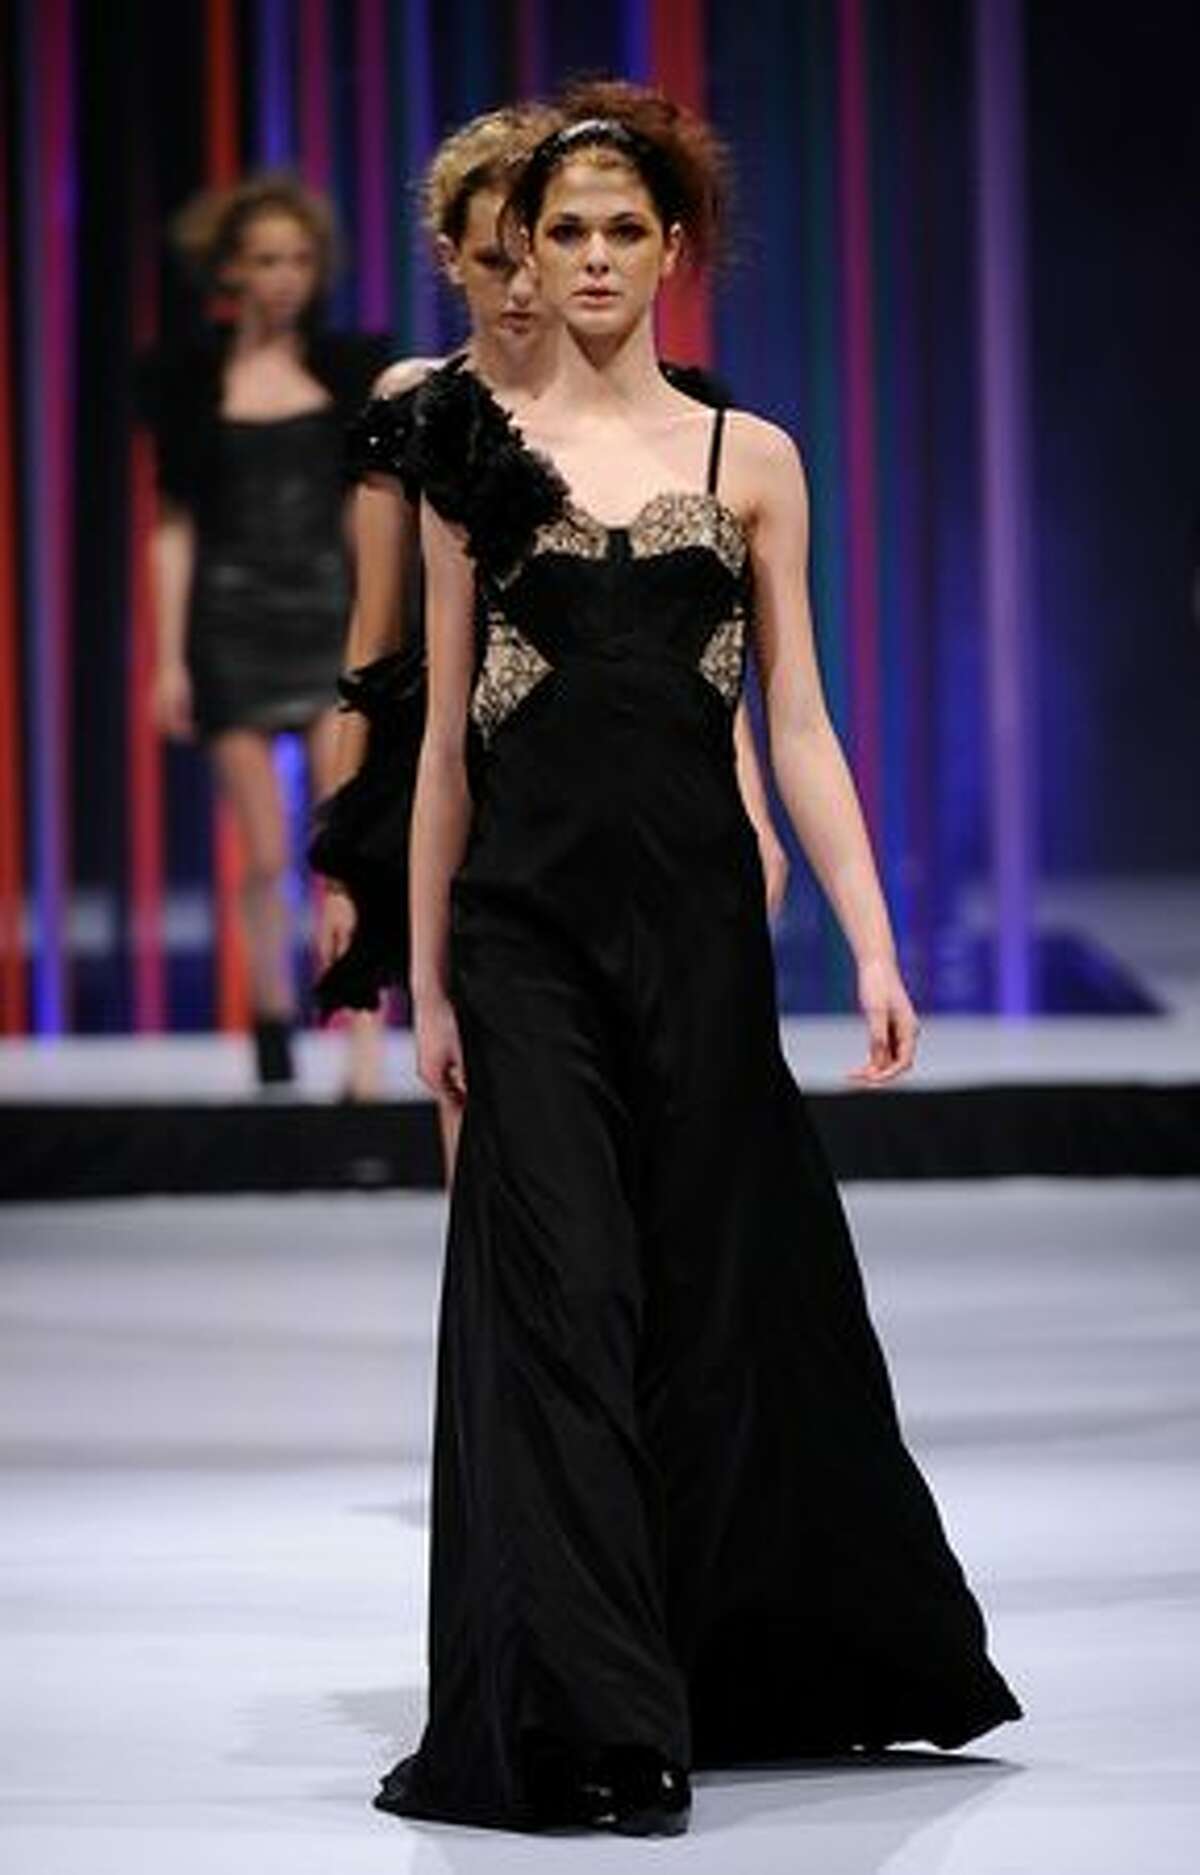 A model showcases a design by Aurelio Costarella on the catwalk during the StyleAid Perth Fashion Event 2010 at the Burswood Entertainment Complex in Perth, Australia.